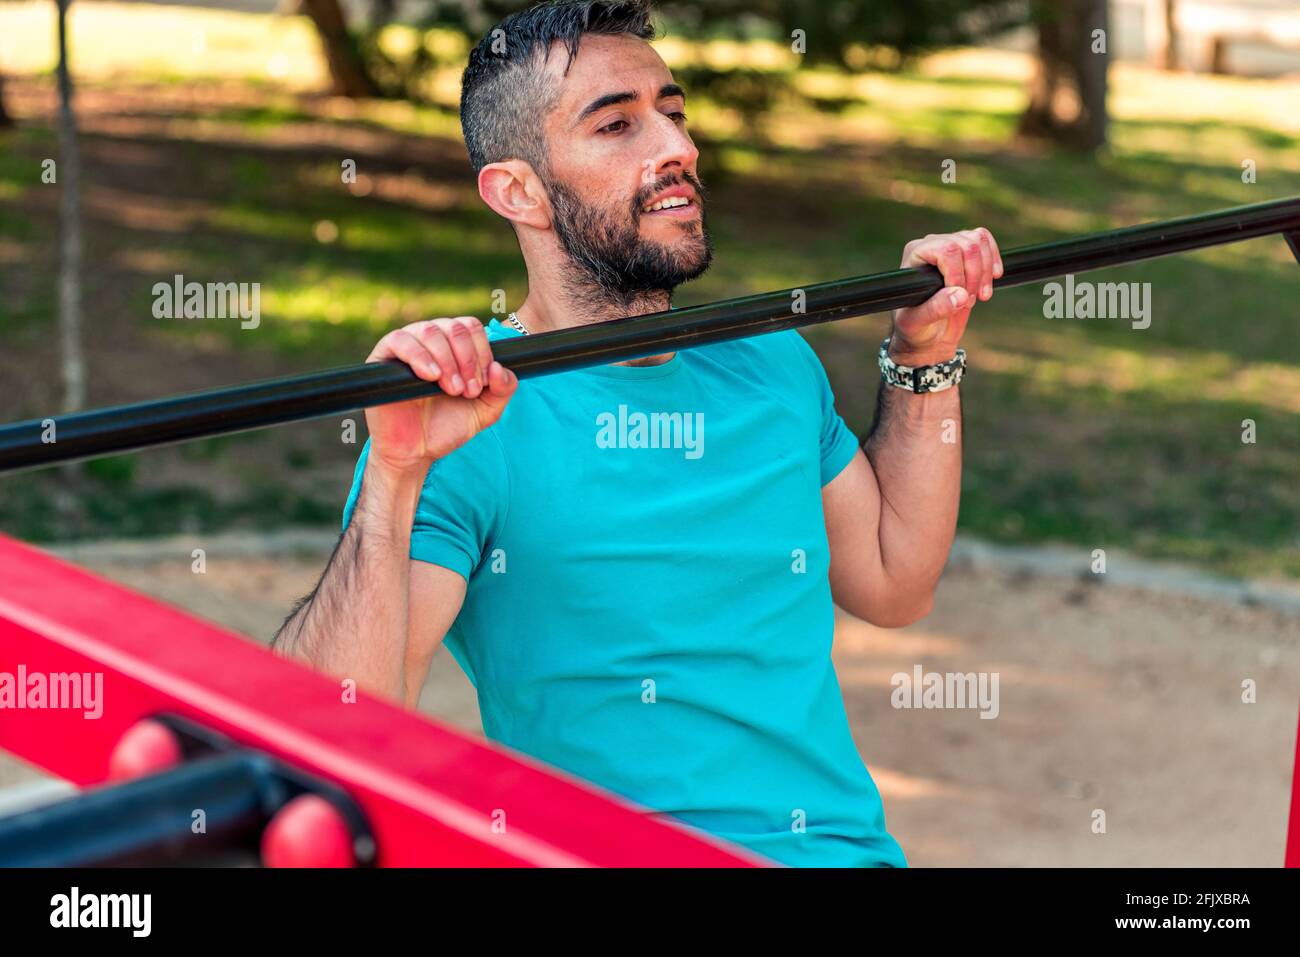 Top view of a Dark-haired athlete with beard doing a pull-up on a calisthenics bar. Outdoor crossfit concept. Stock Photo